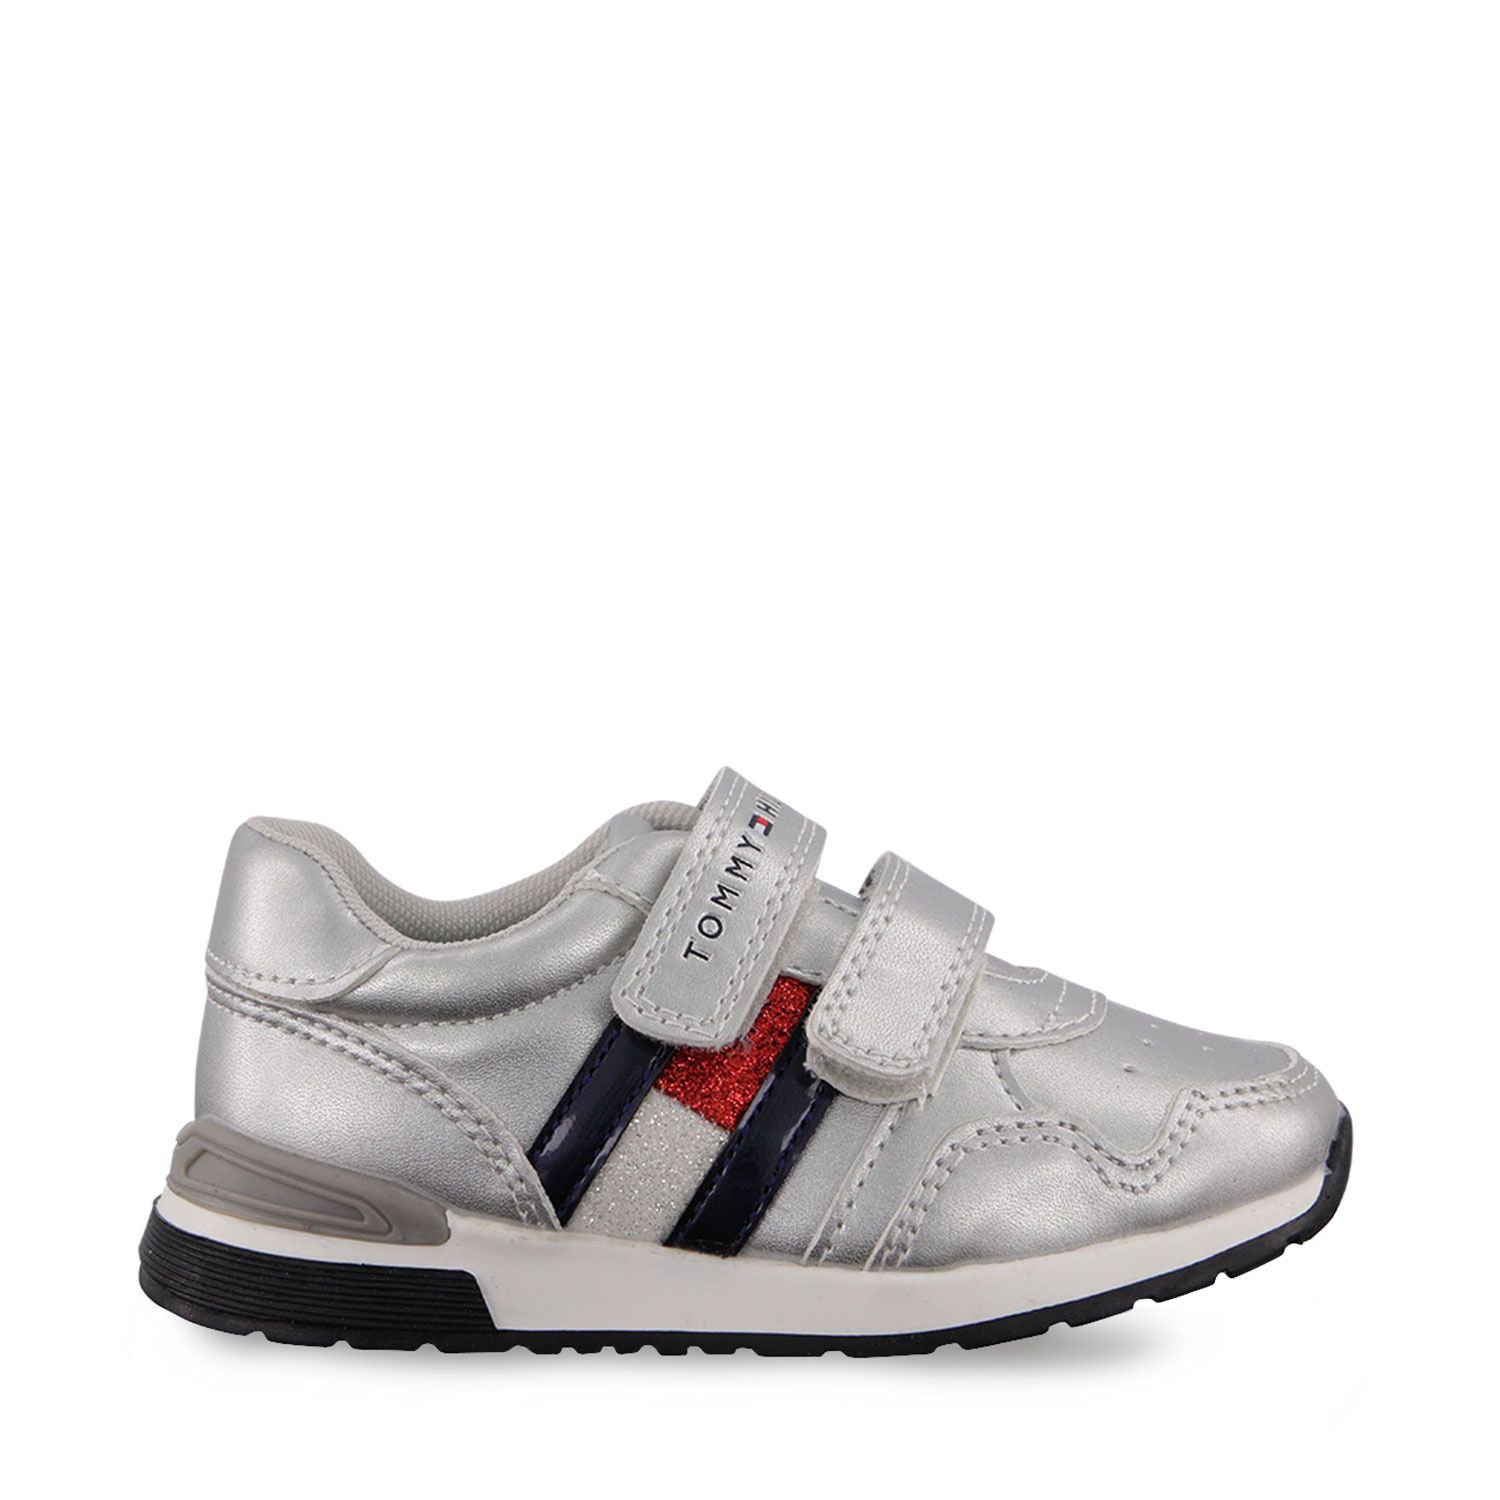 Momento correr Molester Tommy Hilfiger 30810 Girls Silver at Coccinelle